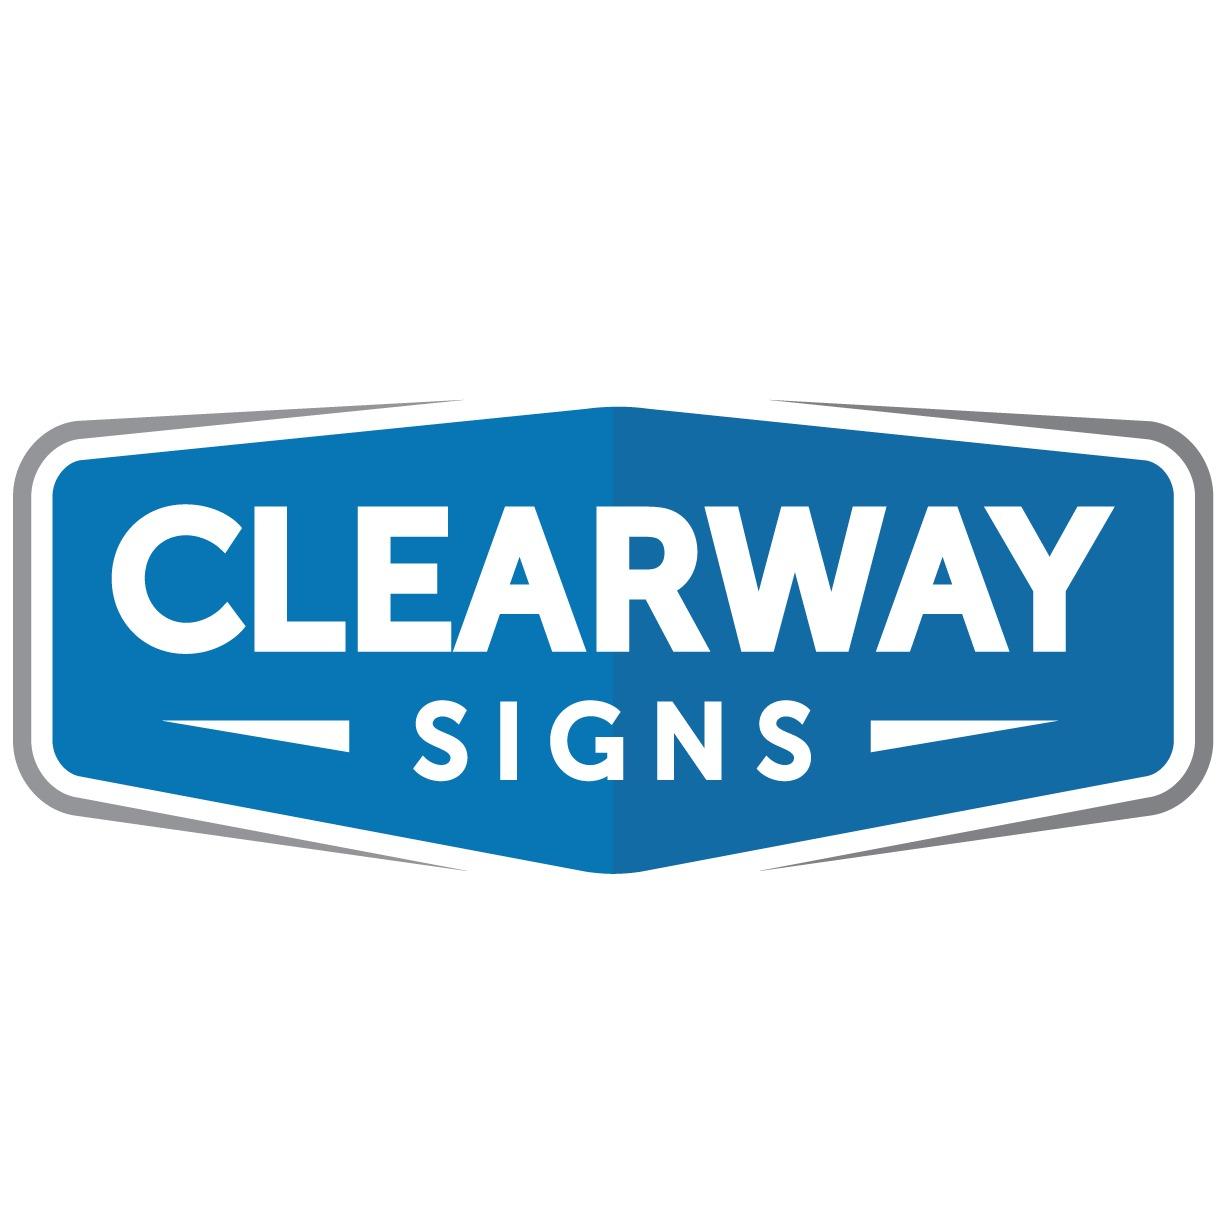 Clearway Signs - Puyallup, WA 98371 - (253)314-5623 | ShowMeLocal.com